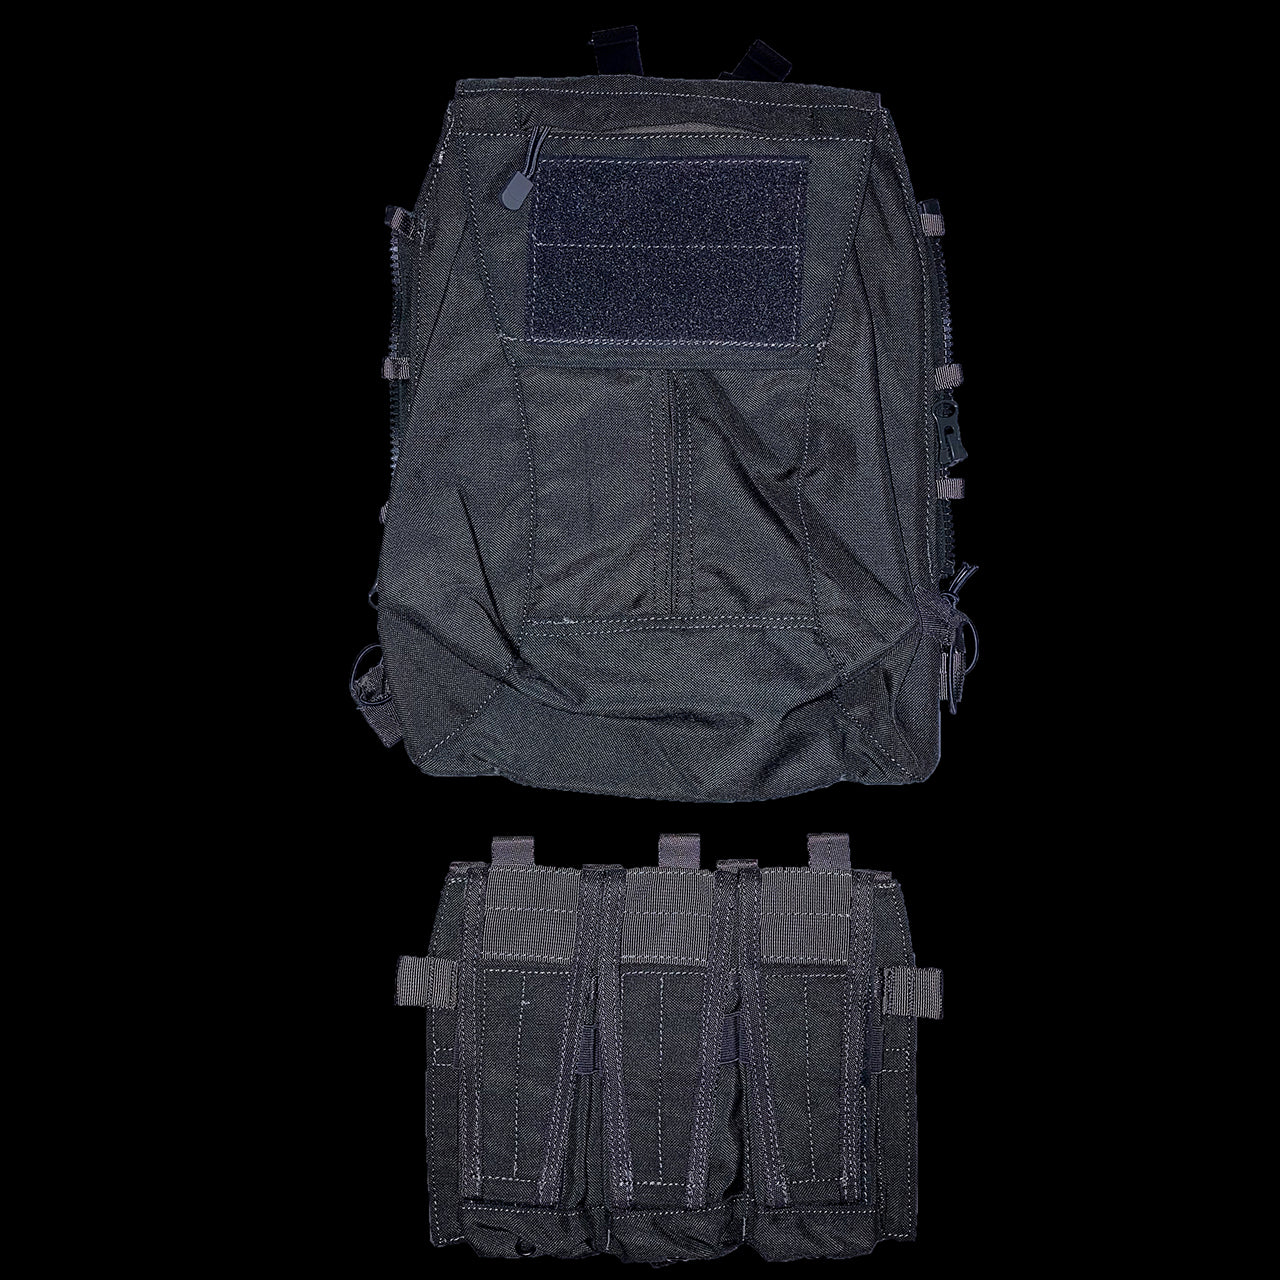 MINIMALIST MKII EXTENDED MISSIONS PACK (MILITARY GREY) - FORTITUDE WORKS SINGAPORE